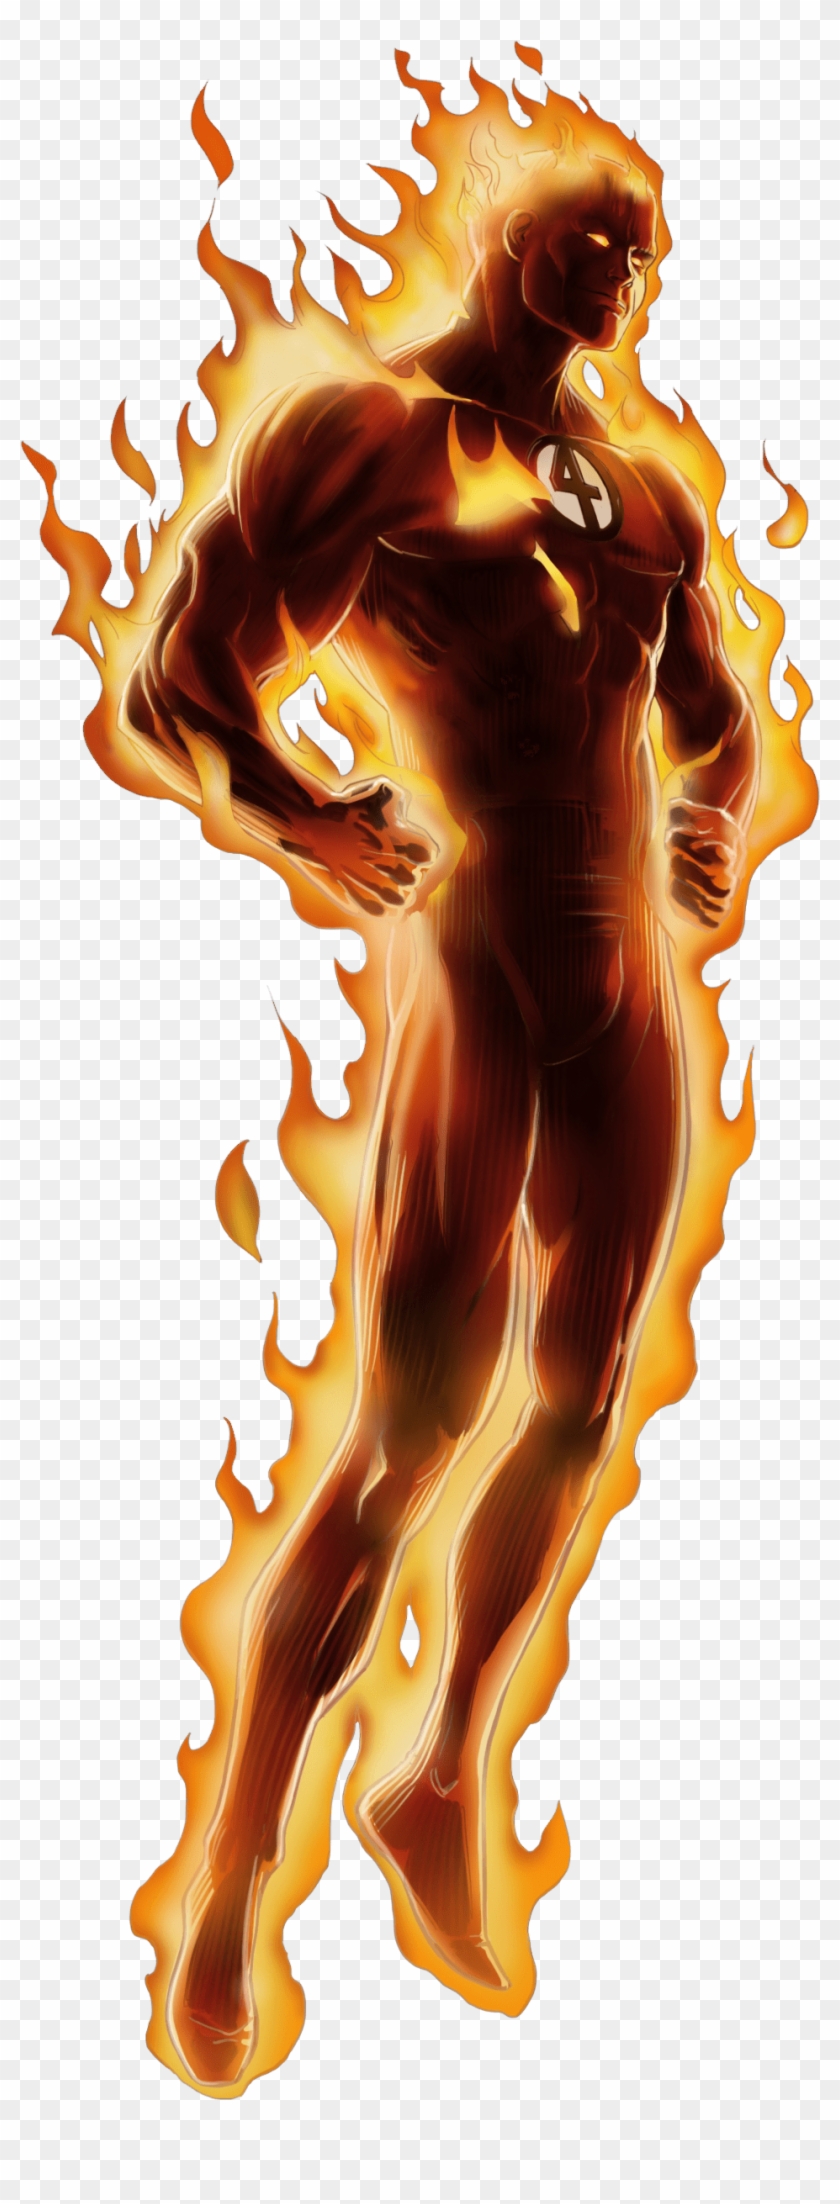 Human Torch Standing - Human Torch Png Clipart #458928